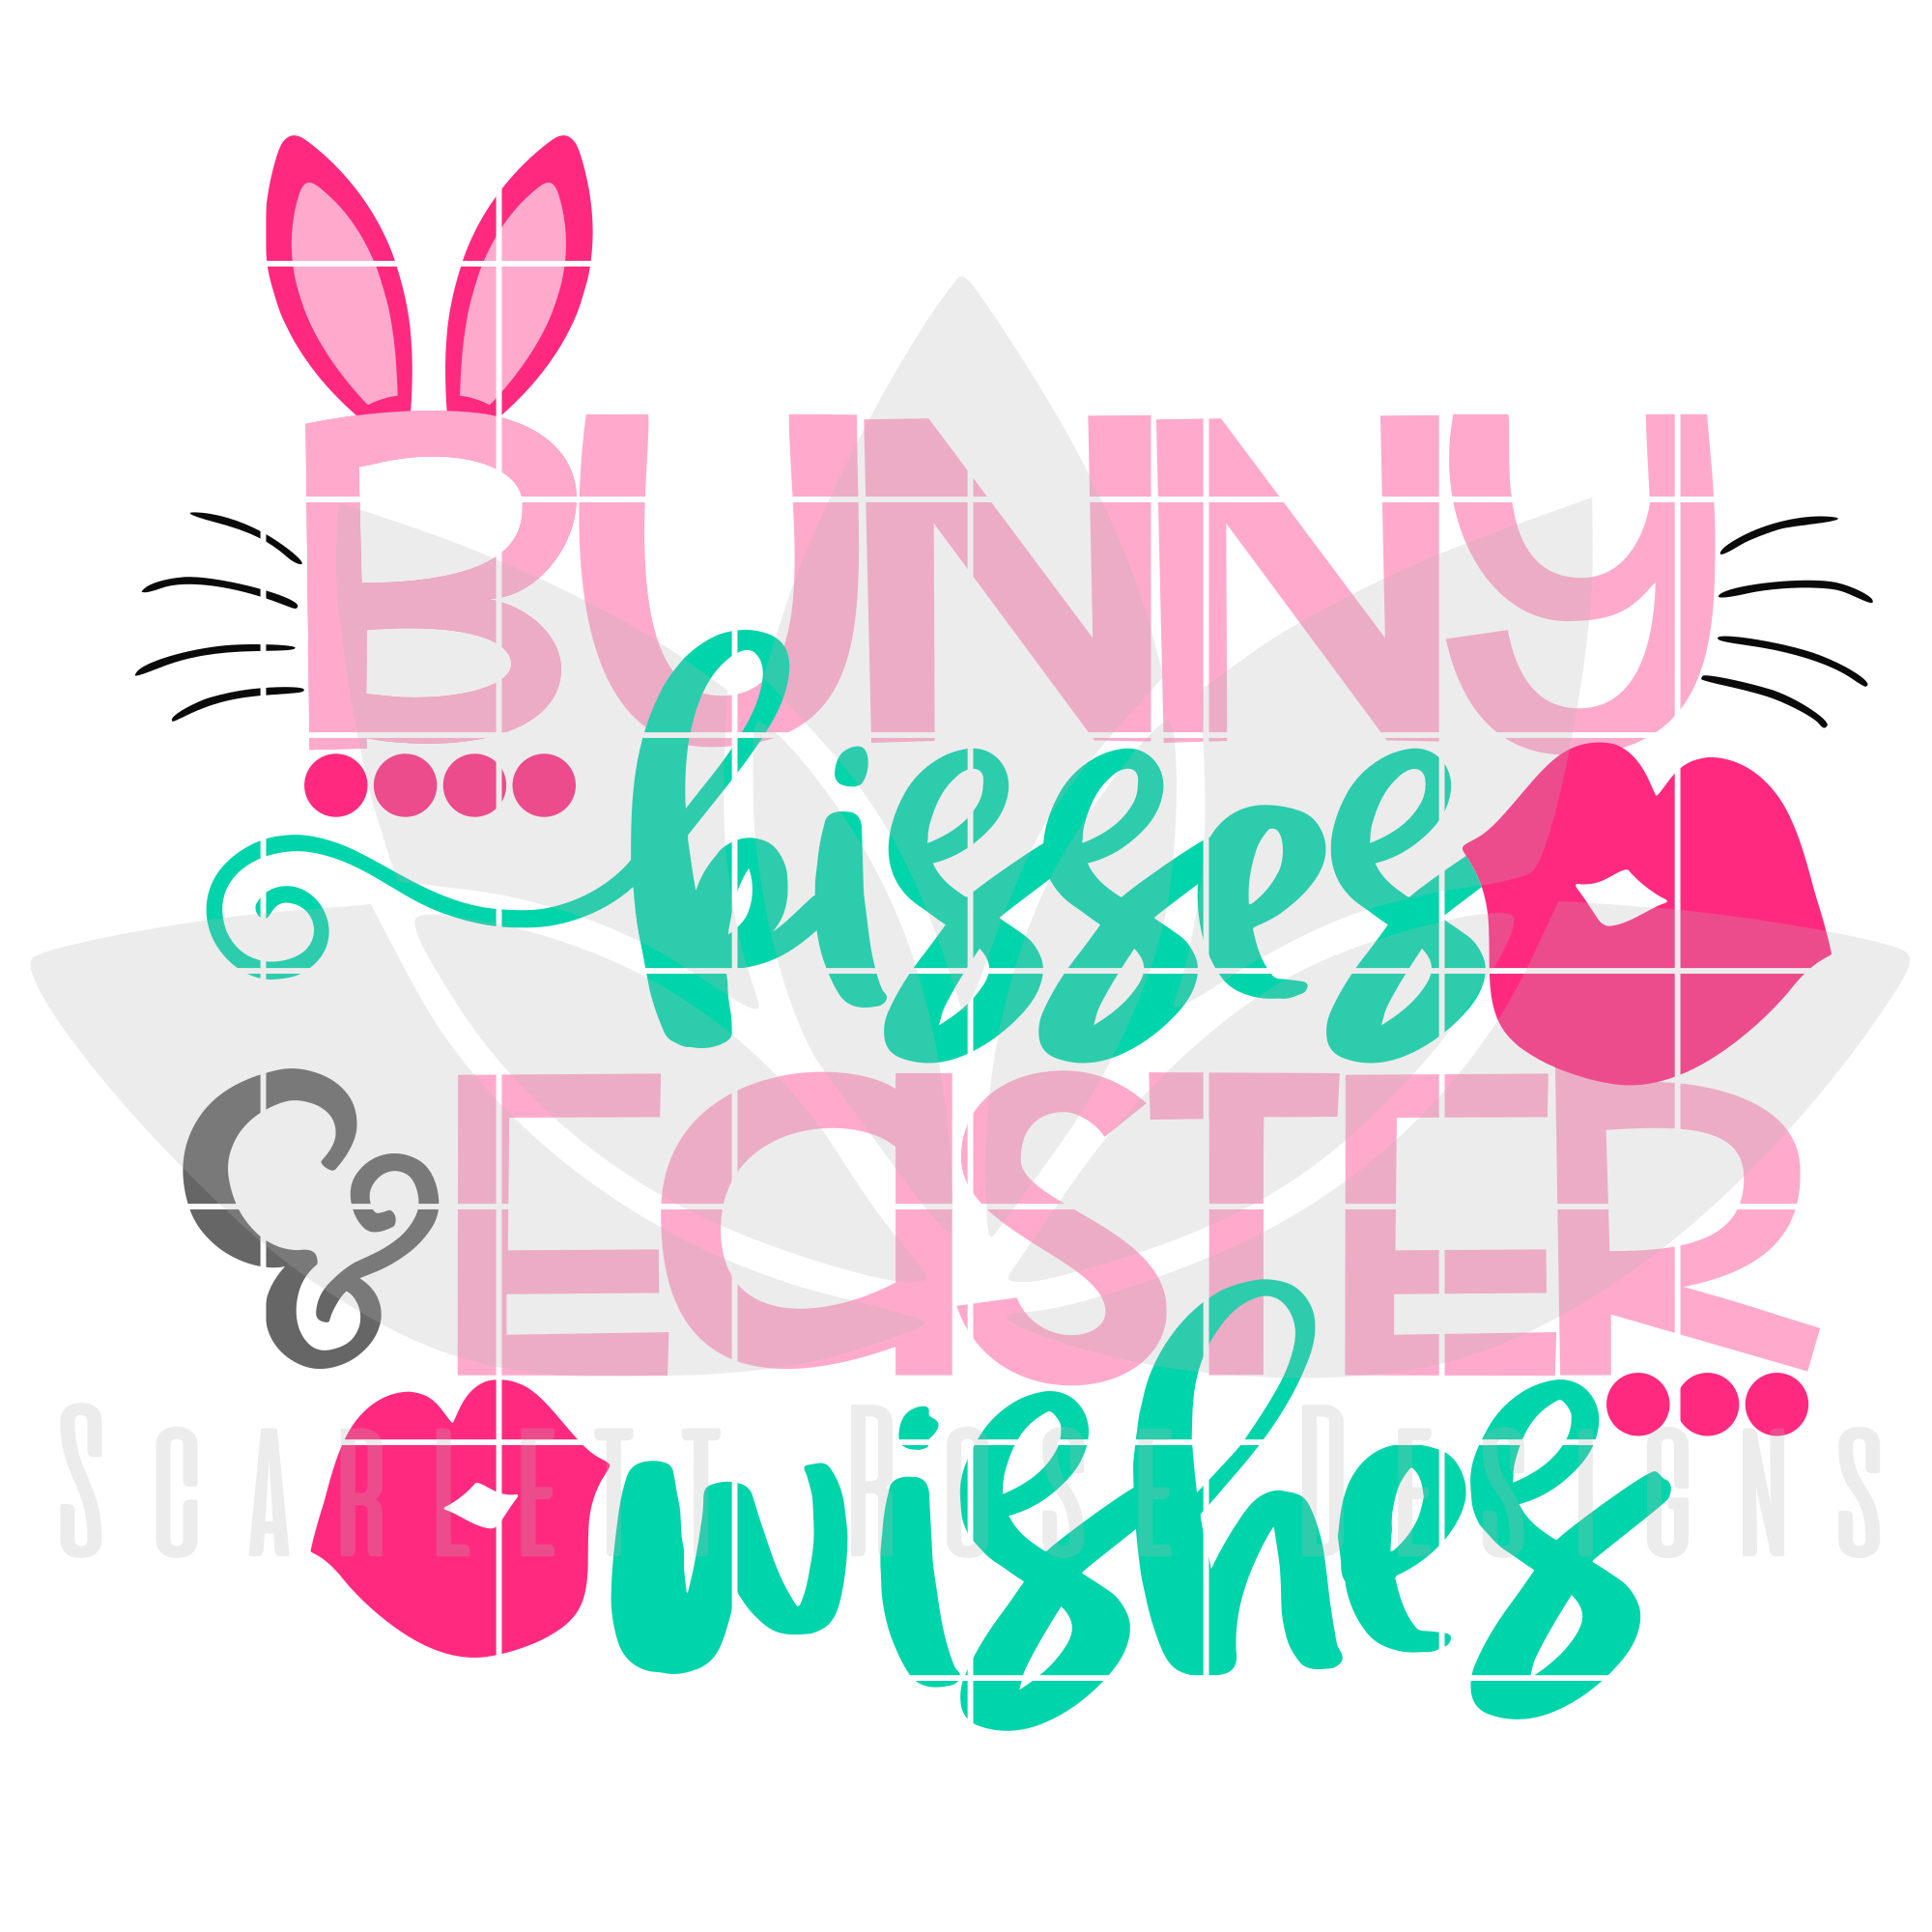 Bunny kisses easter wishes